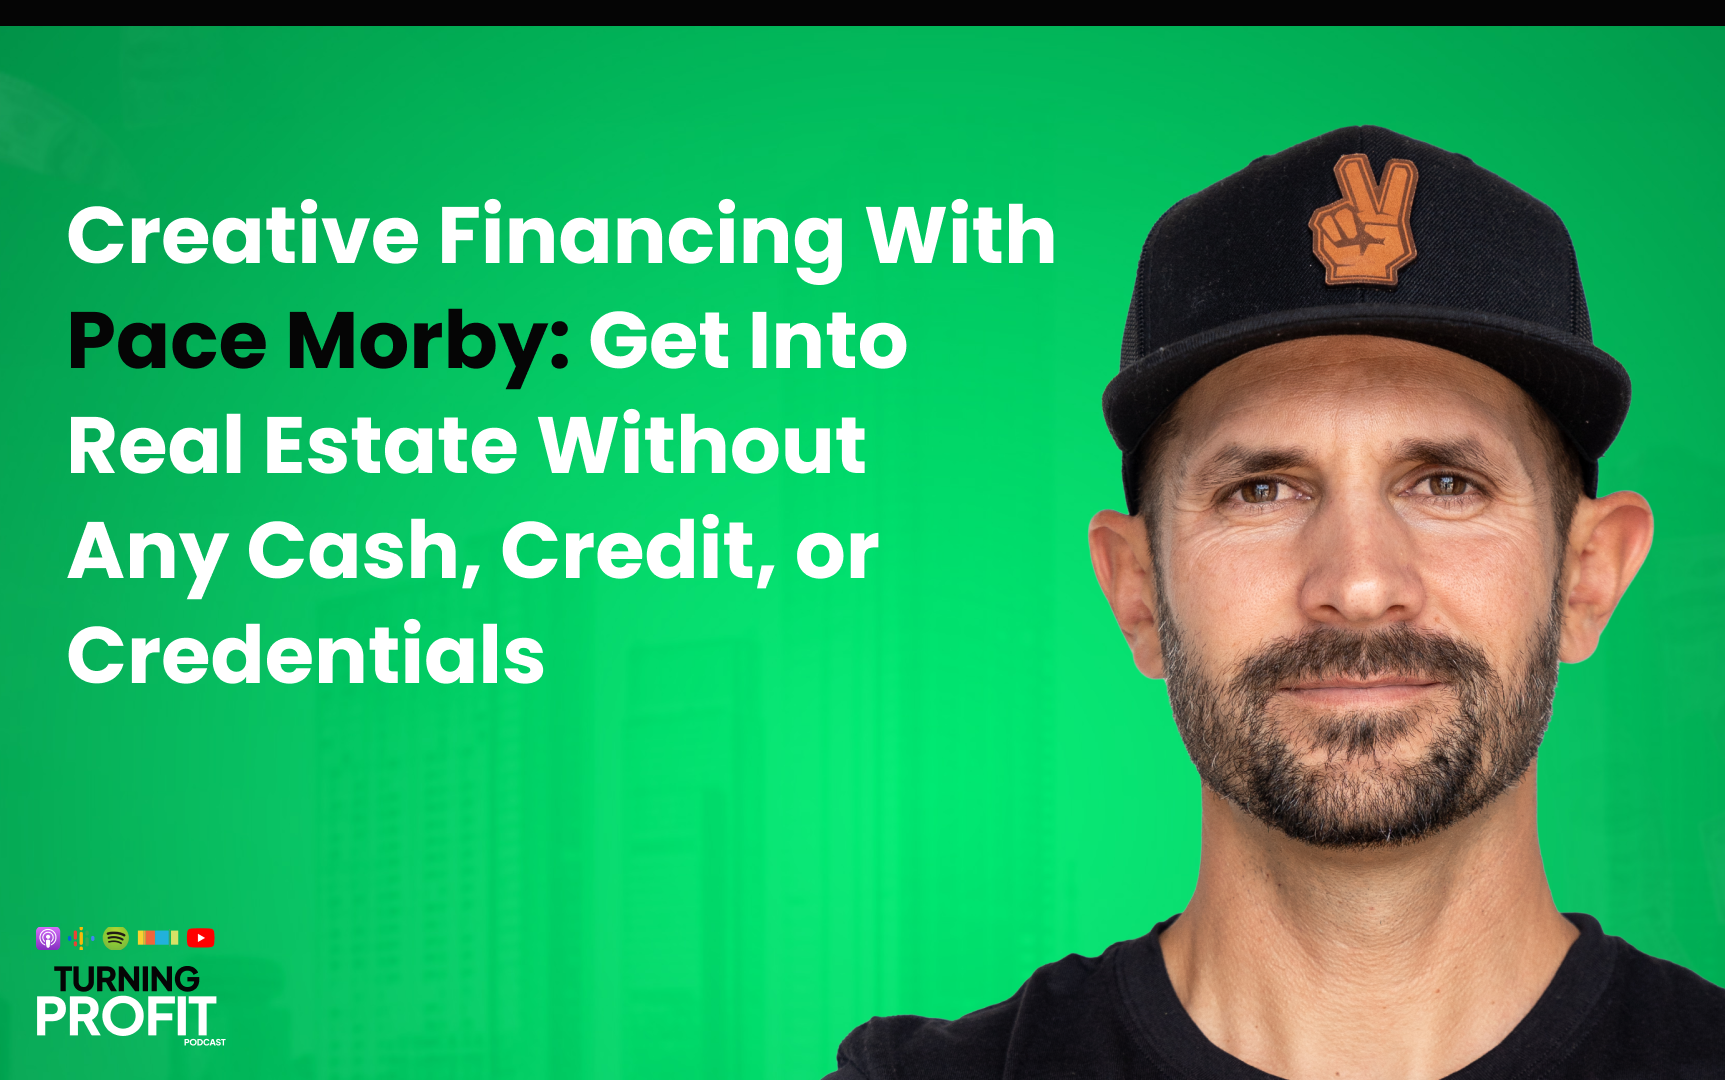 Creative Finance With Pace Morby: Get Into Real Estate Without Any Cash, Credit, or Credentials